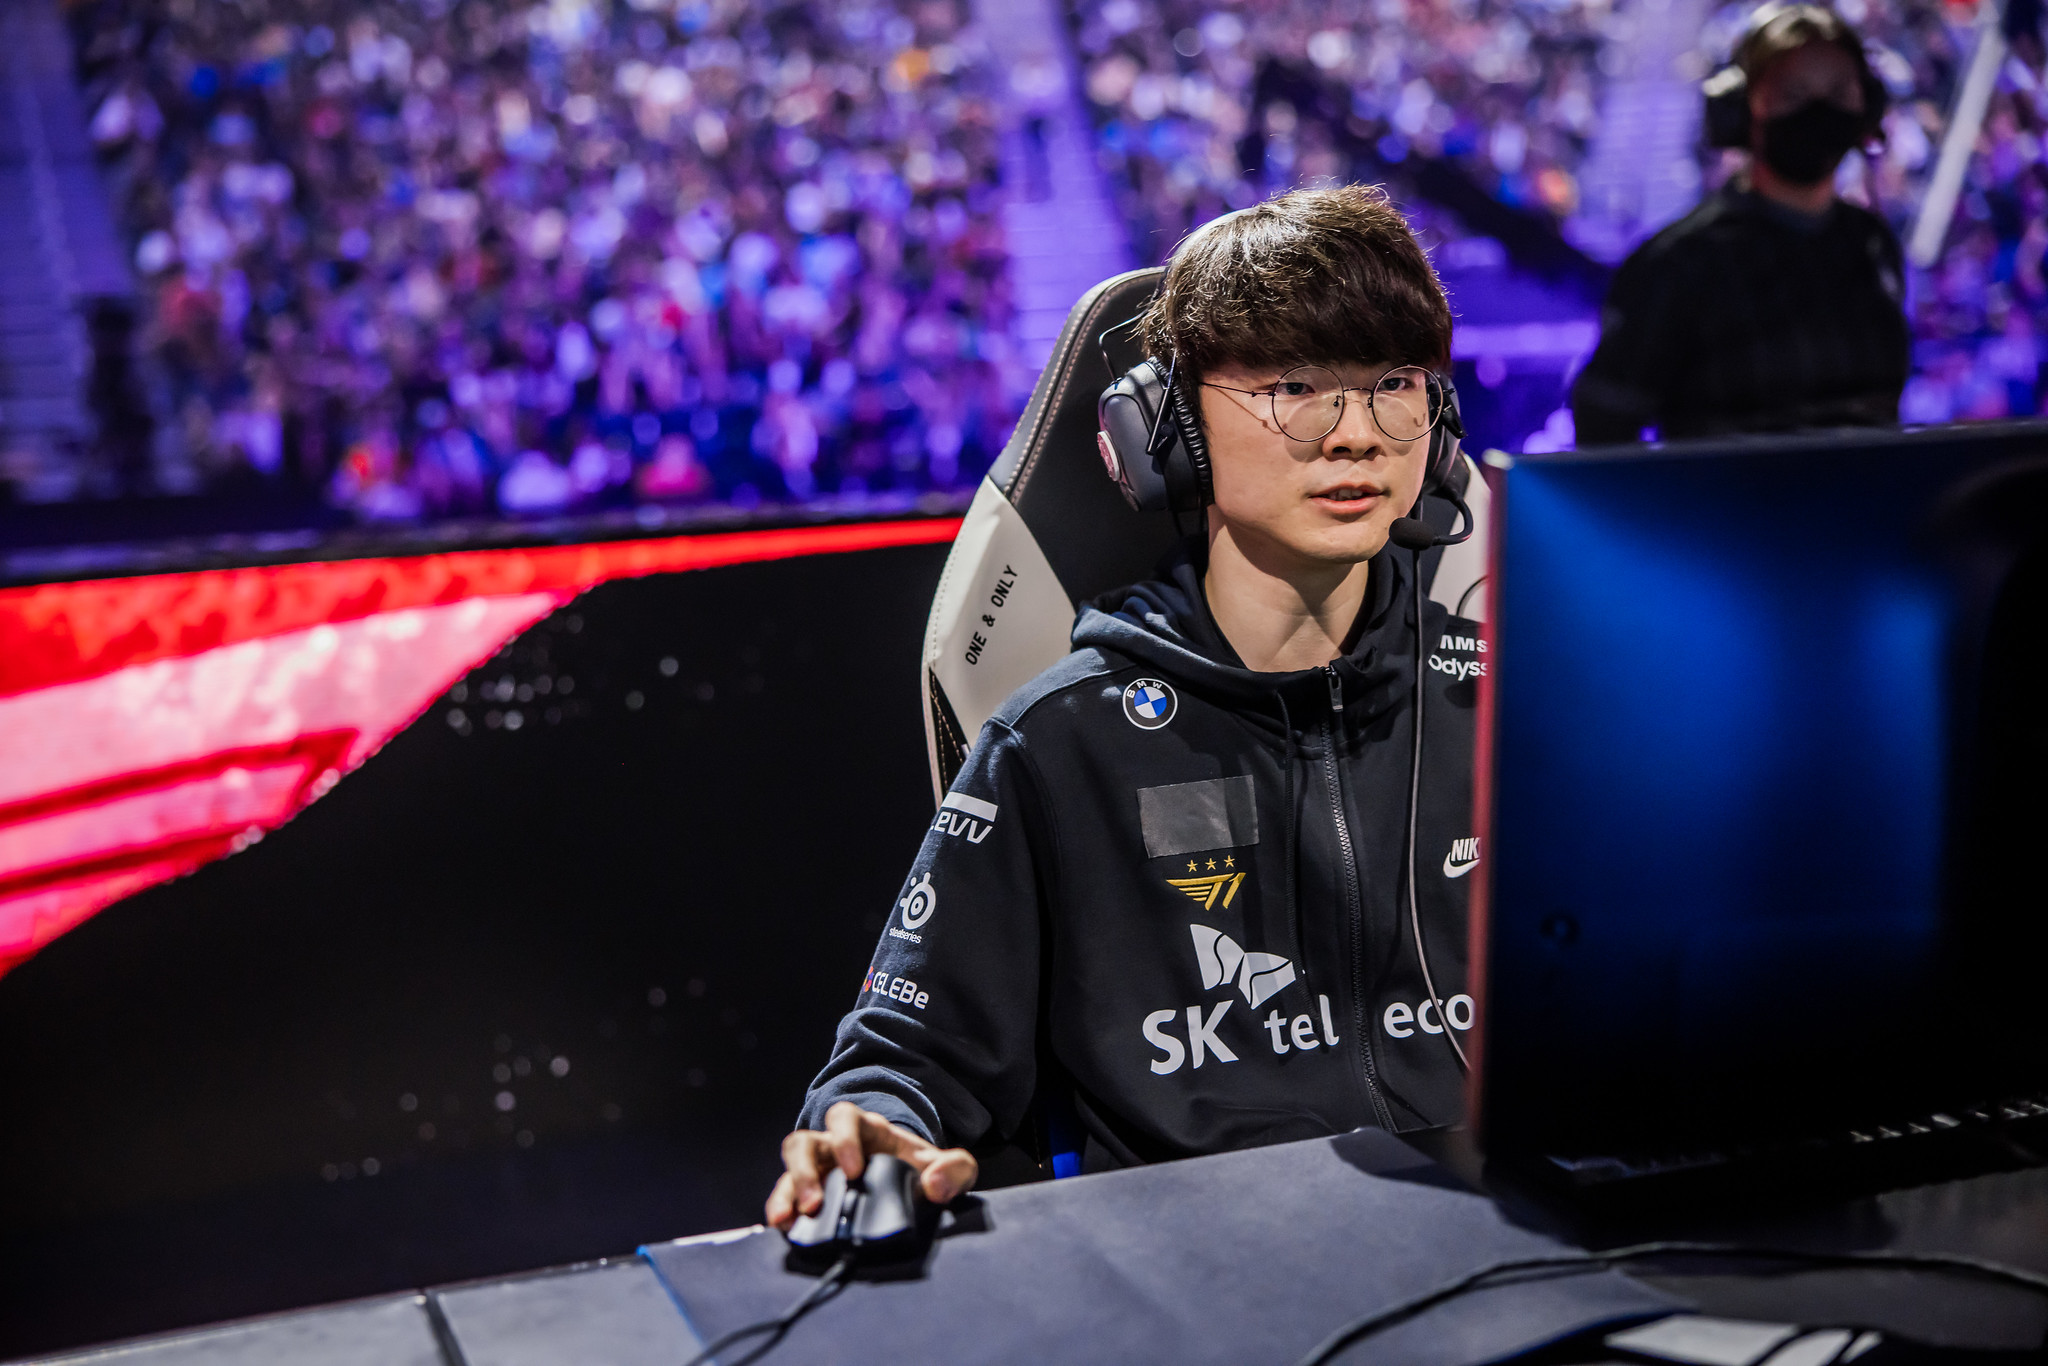 SAN FRANCISCO, CALIFORNIA - NOVEMBER 05: Lee "Faker" Sang-hyeok of T1 competes at the League of Legends World Championship Finals on November 5, 2022 in San Francisco, CA. (Photo by Colin Young-Wolff/Riot Games)